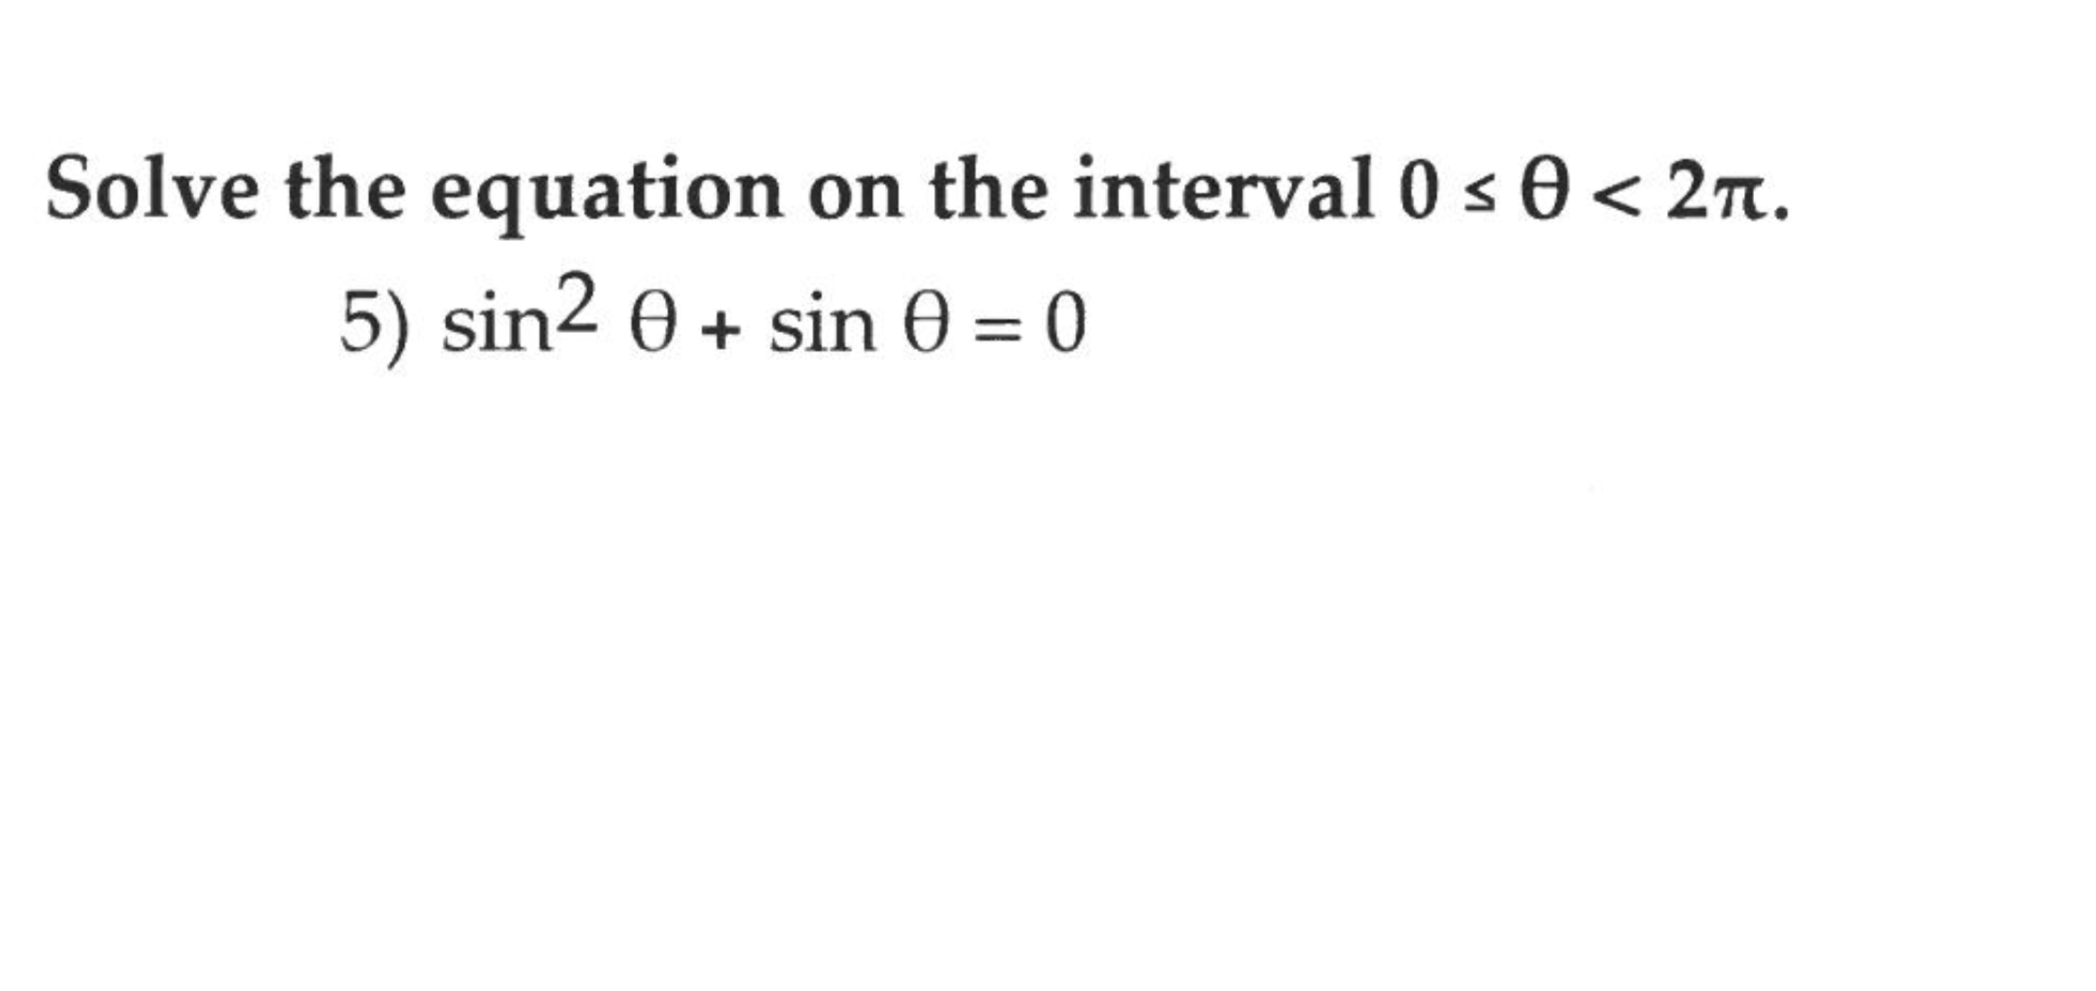 Solve the equation on the interval 0 s 0 < 2n.
5) sin2 0 + sin 0 = 0
